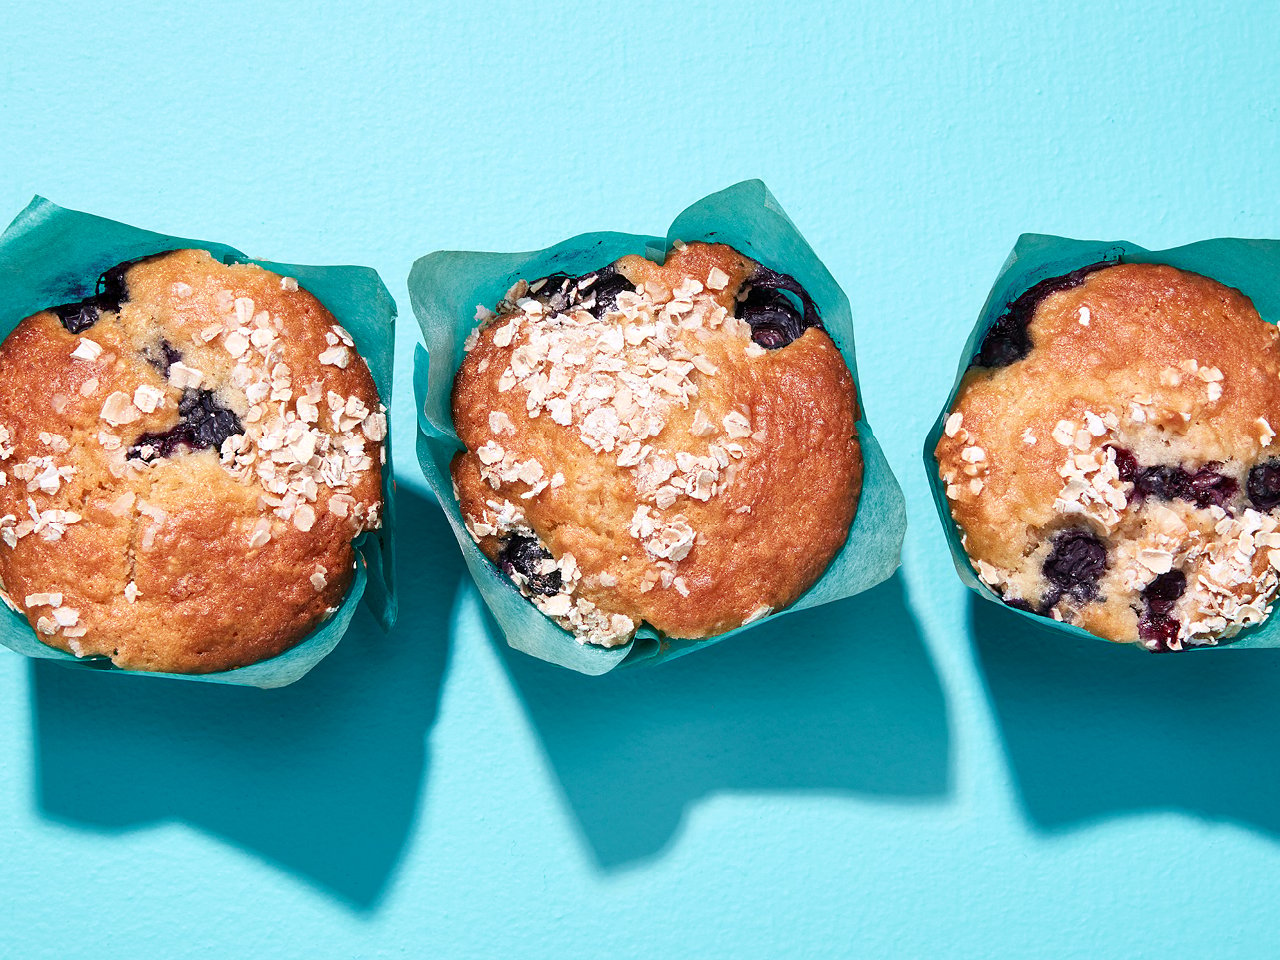 Three blueberry muffins with blue wrapper, on blue background.